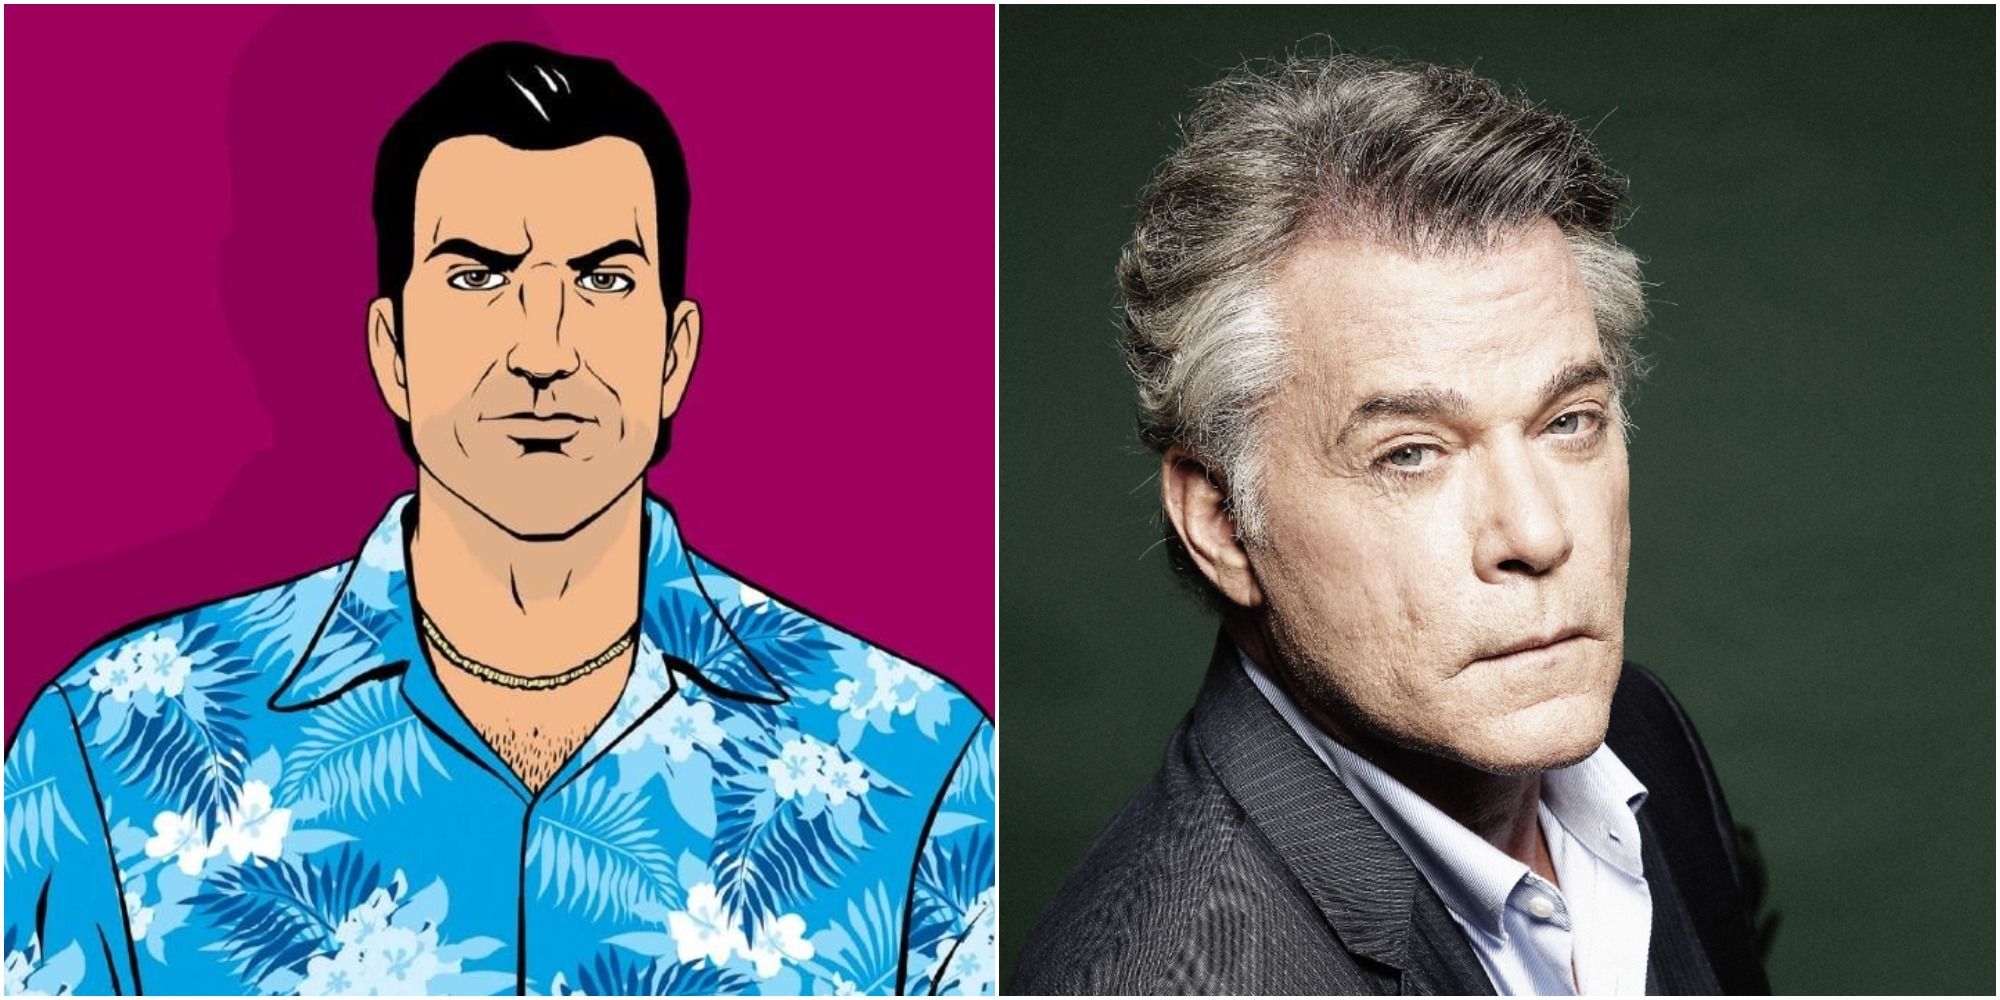 ray liotta as tommy vercetti In GTA: Vice City video game